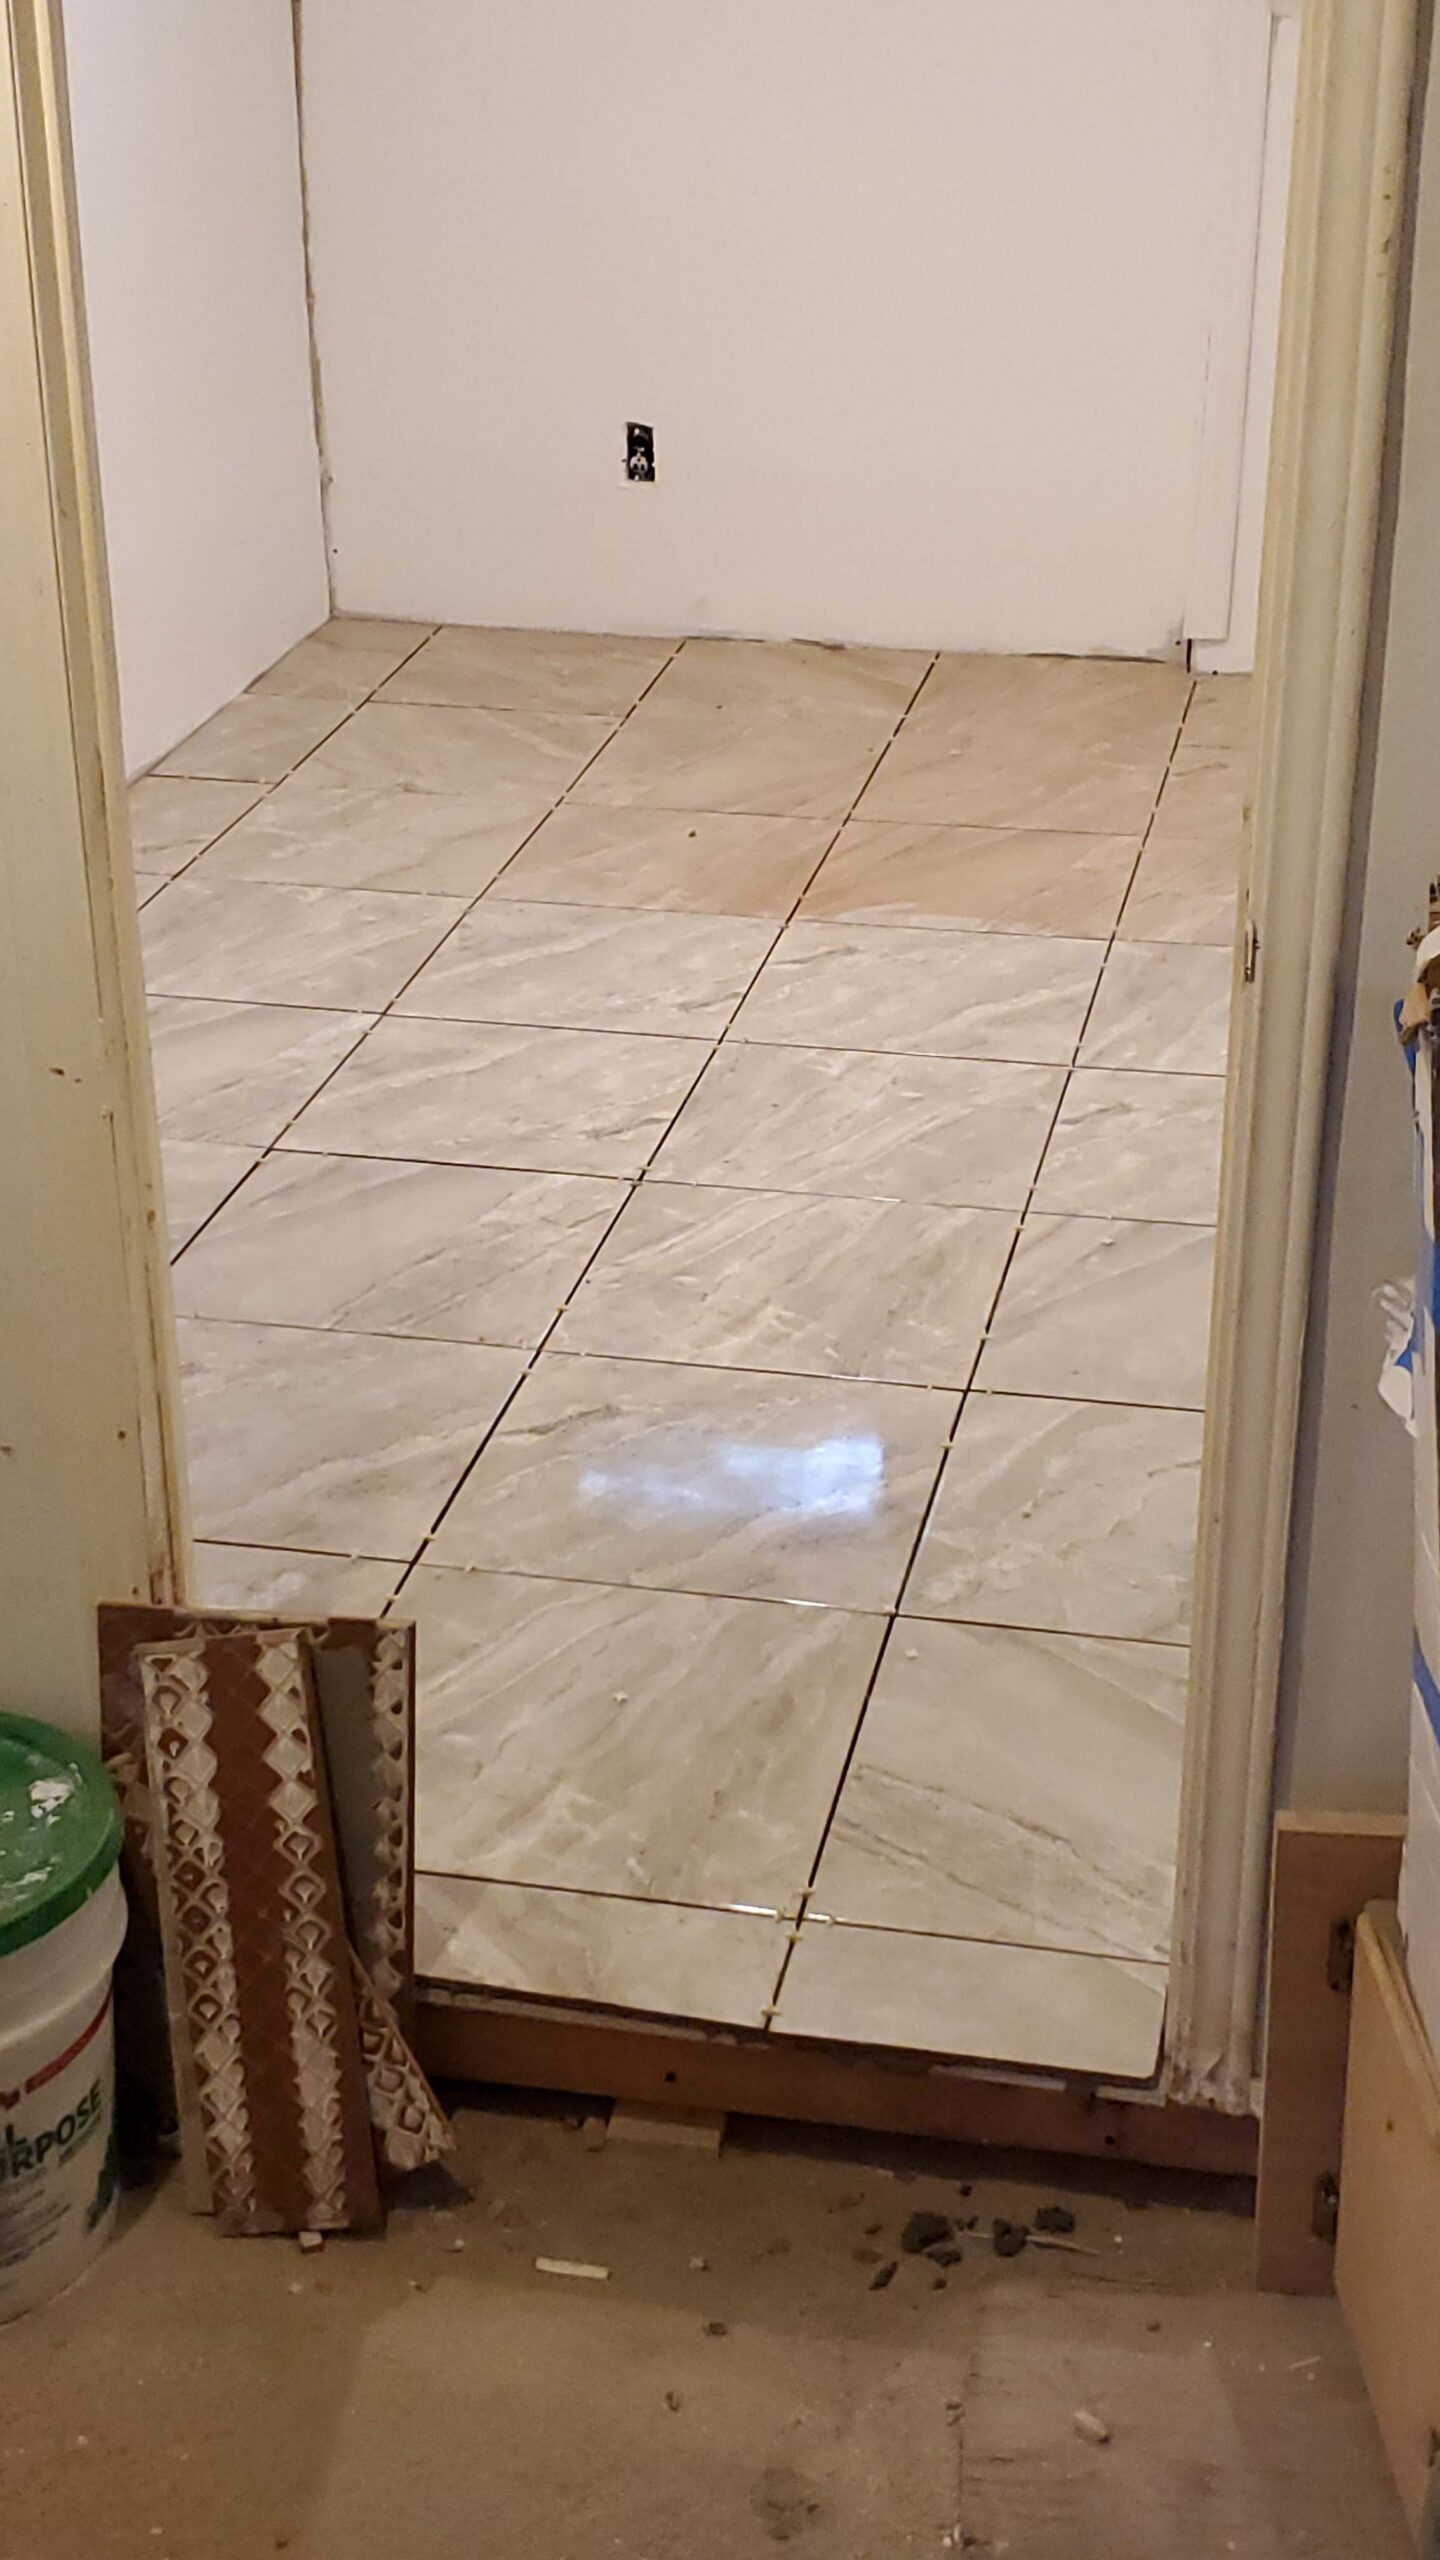 flooring after water damage and bathroom